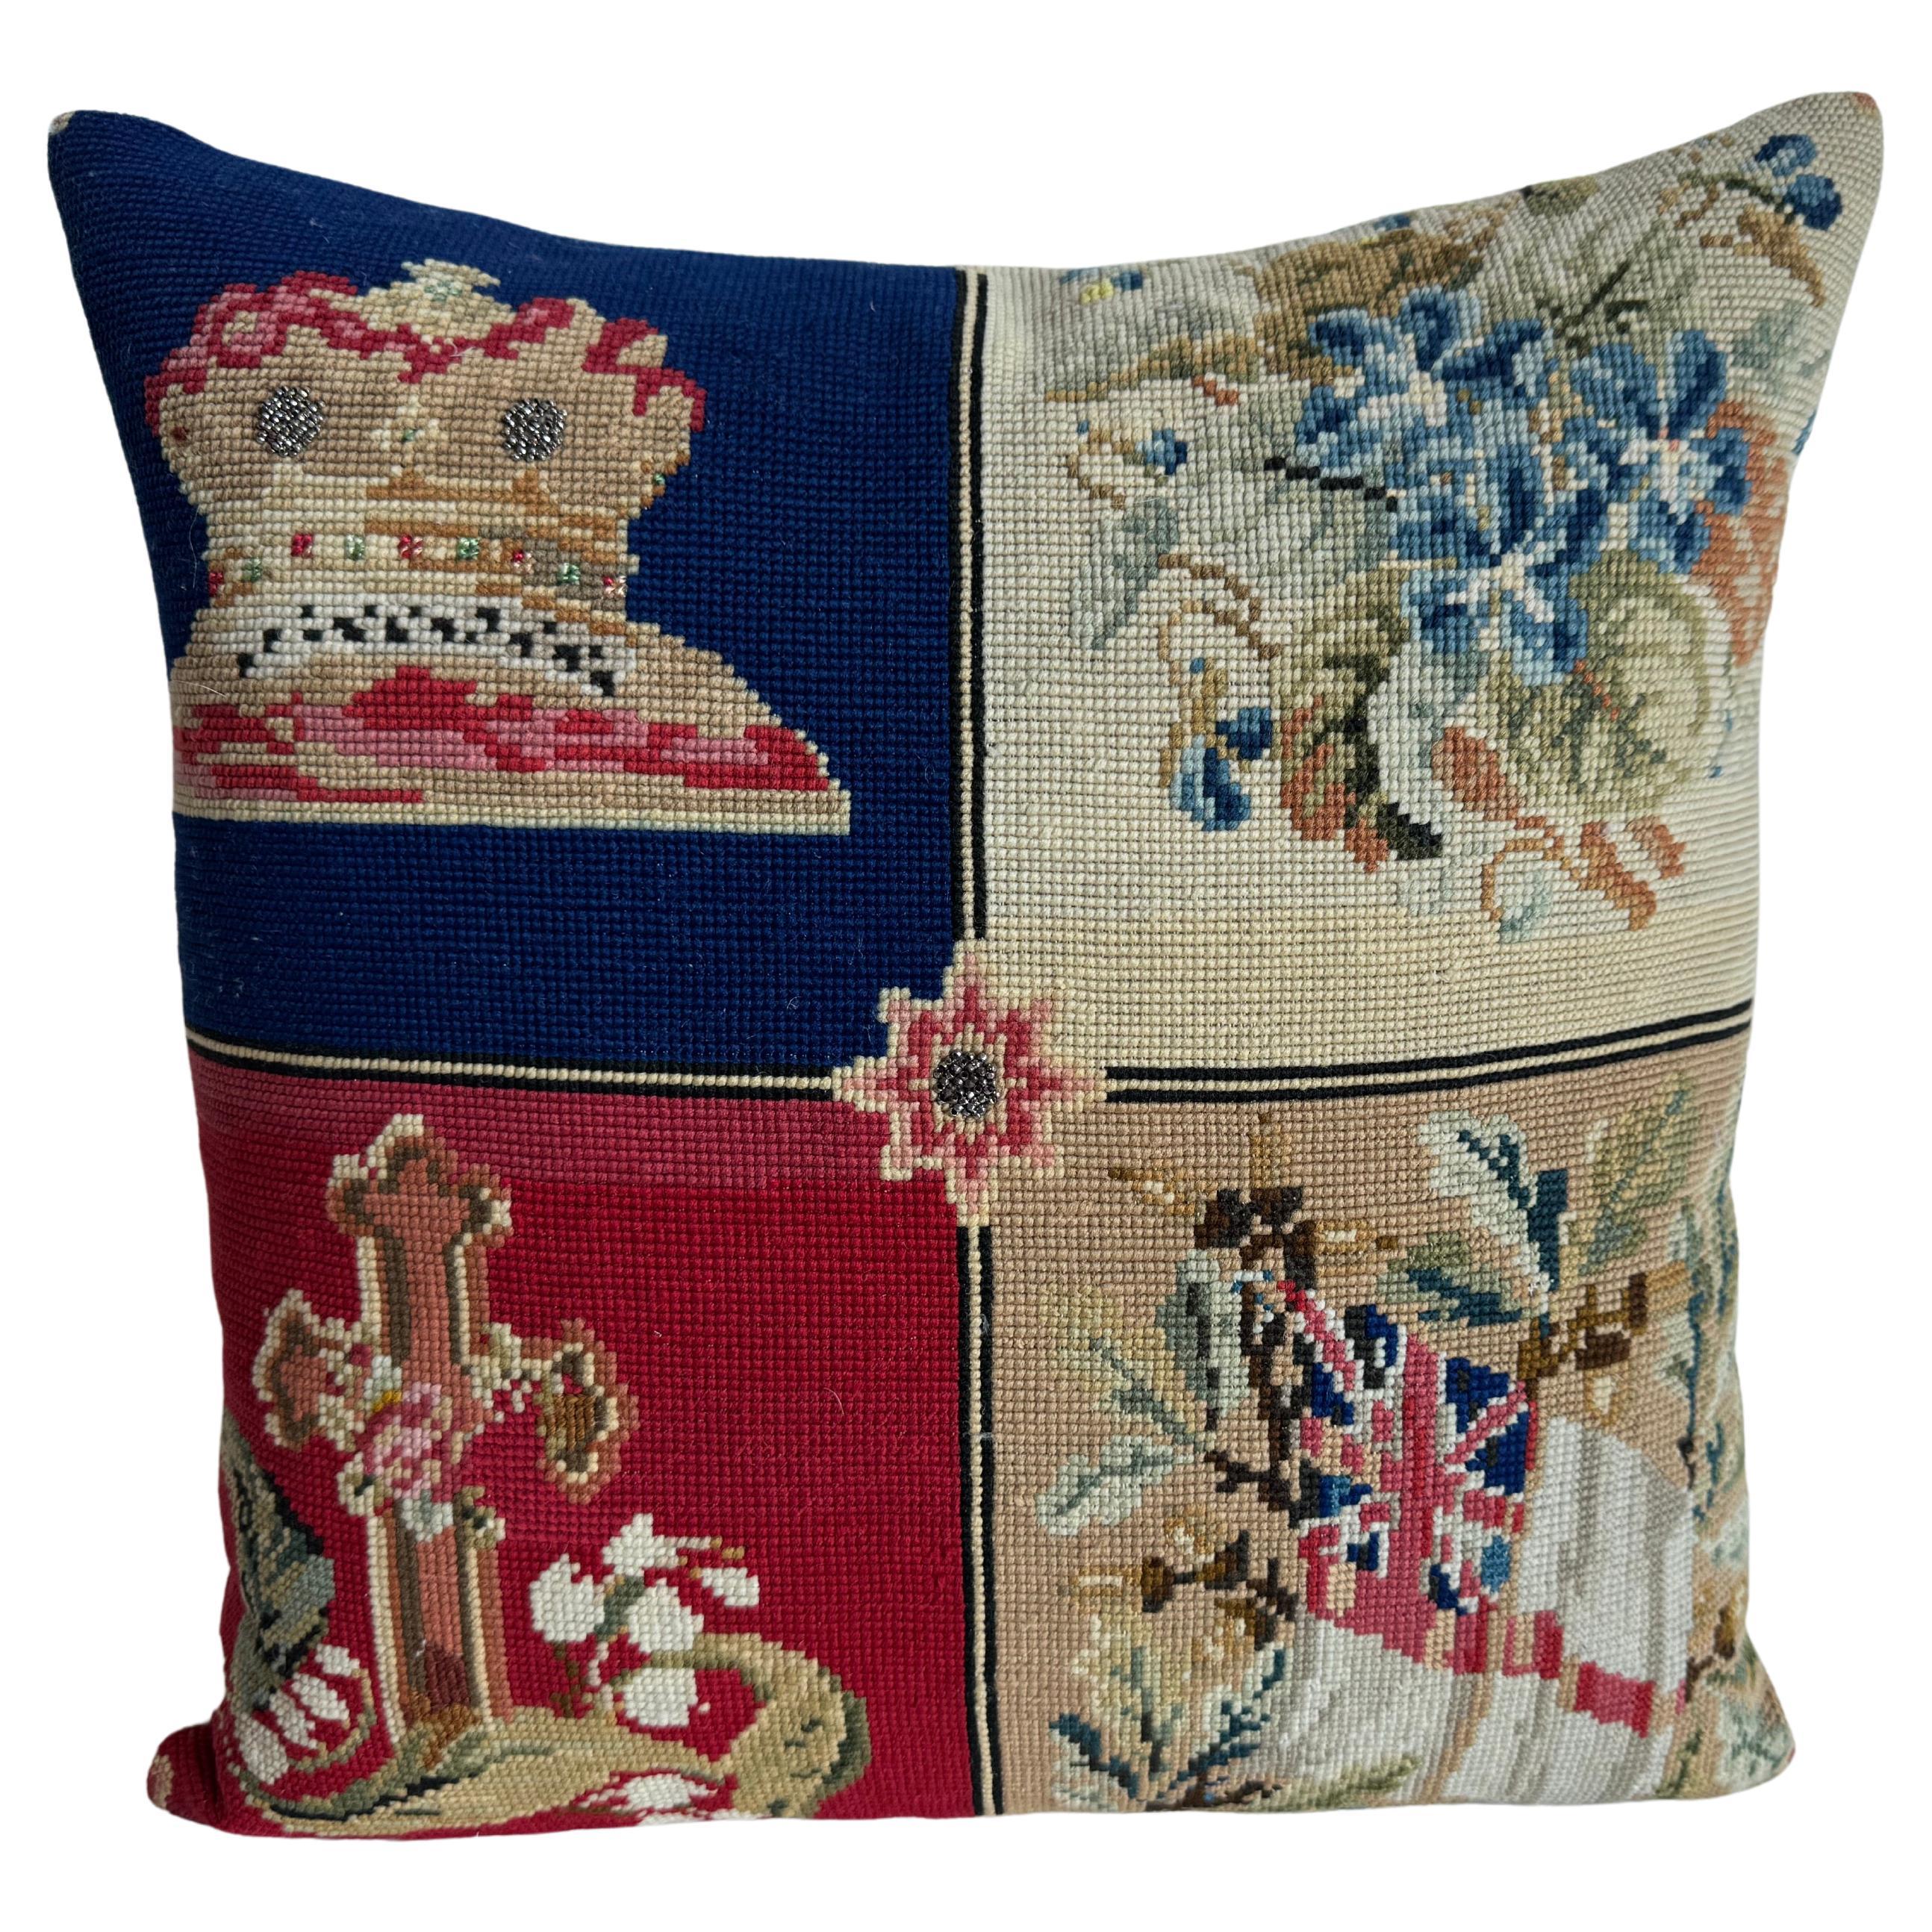 1850 English Needle Work Pillow - 16" X 16' For Sale